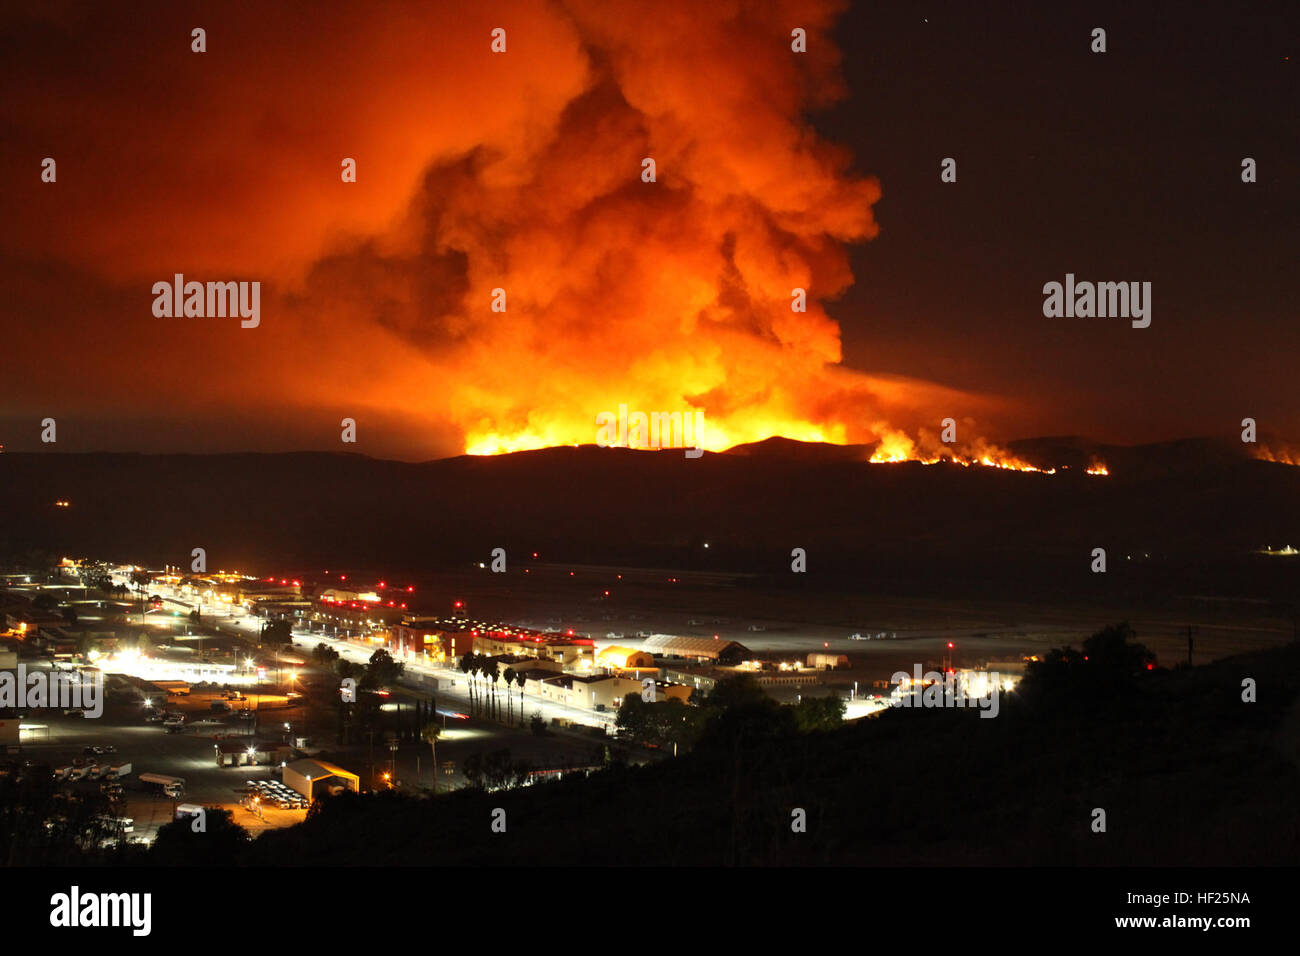 The Las Pulgas Fire burns behind the Marine Corps Air Station at Camp Pendleton, Calif., 16 May, 2014. The Las Pulgas Wildfire on Camp Pendleton has burned more than 15,000 acres and is the largest fire in San Diego County history. (U.S. Marine Corps photo by Sgt. Ethan Johnson/MCIW-MCB CamPen COMCAM/Released) Camp Pendleton Fires 140516-M-HU778-157 Stock Photo